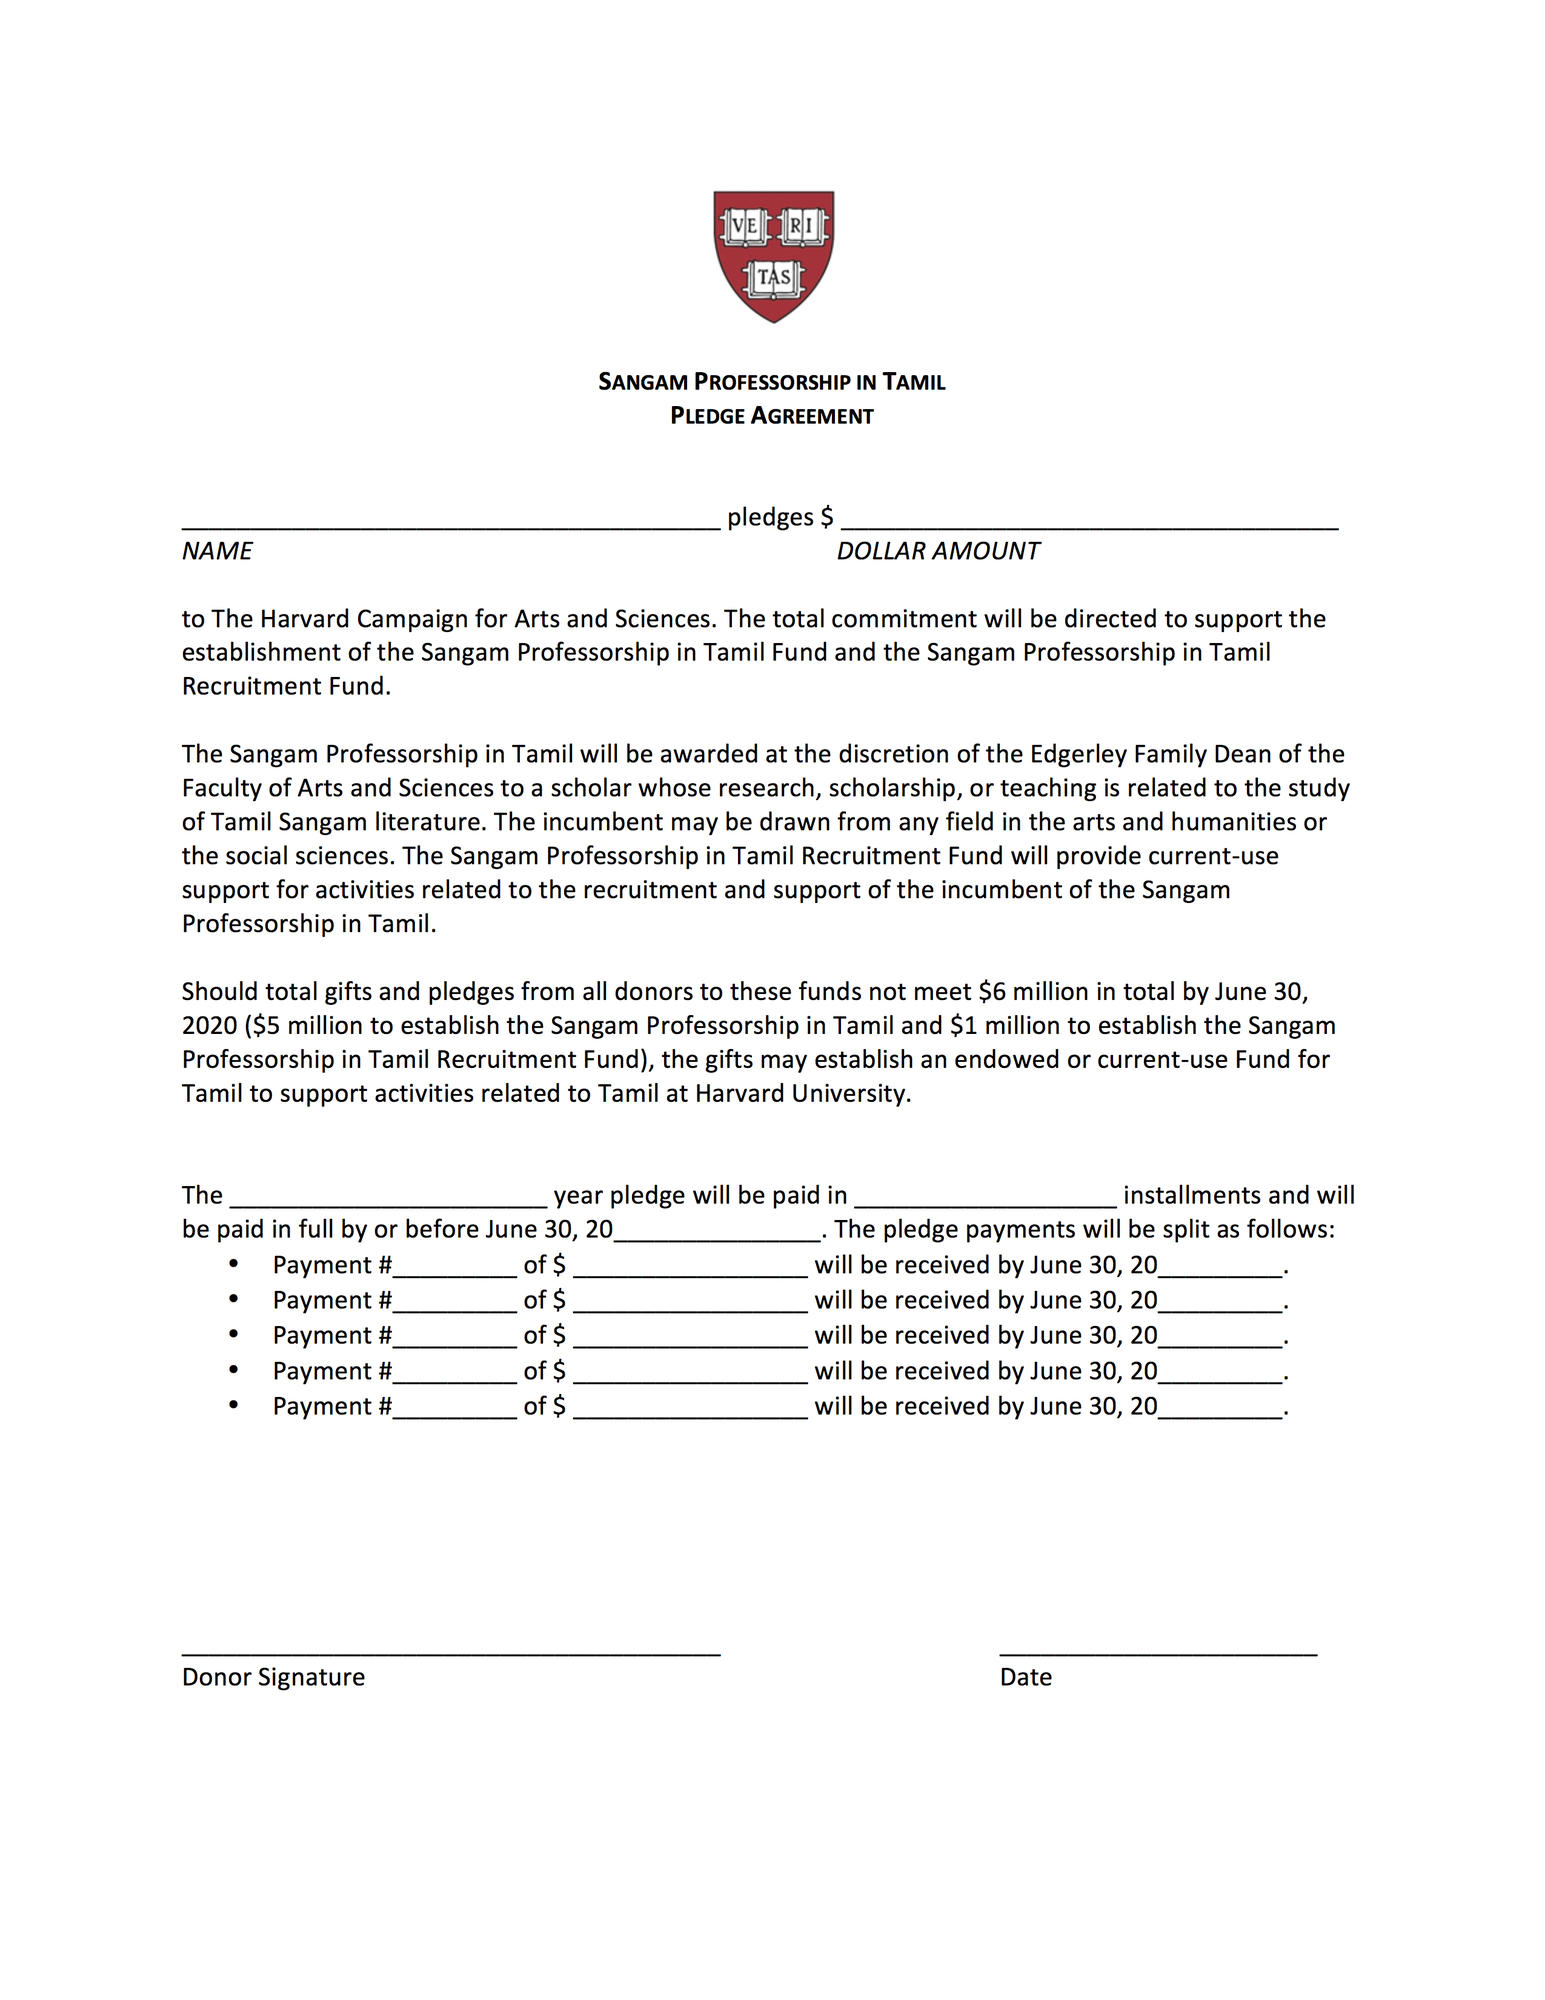 Pledge Agreement (please download and print this document)